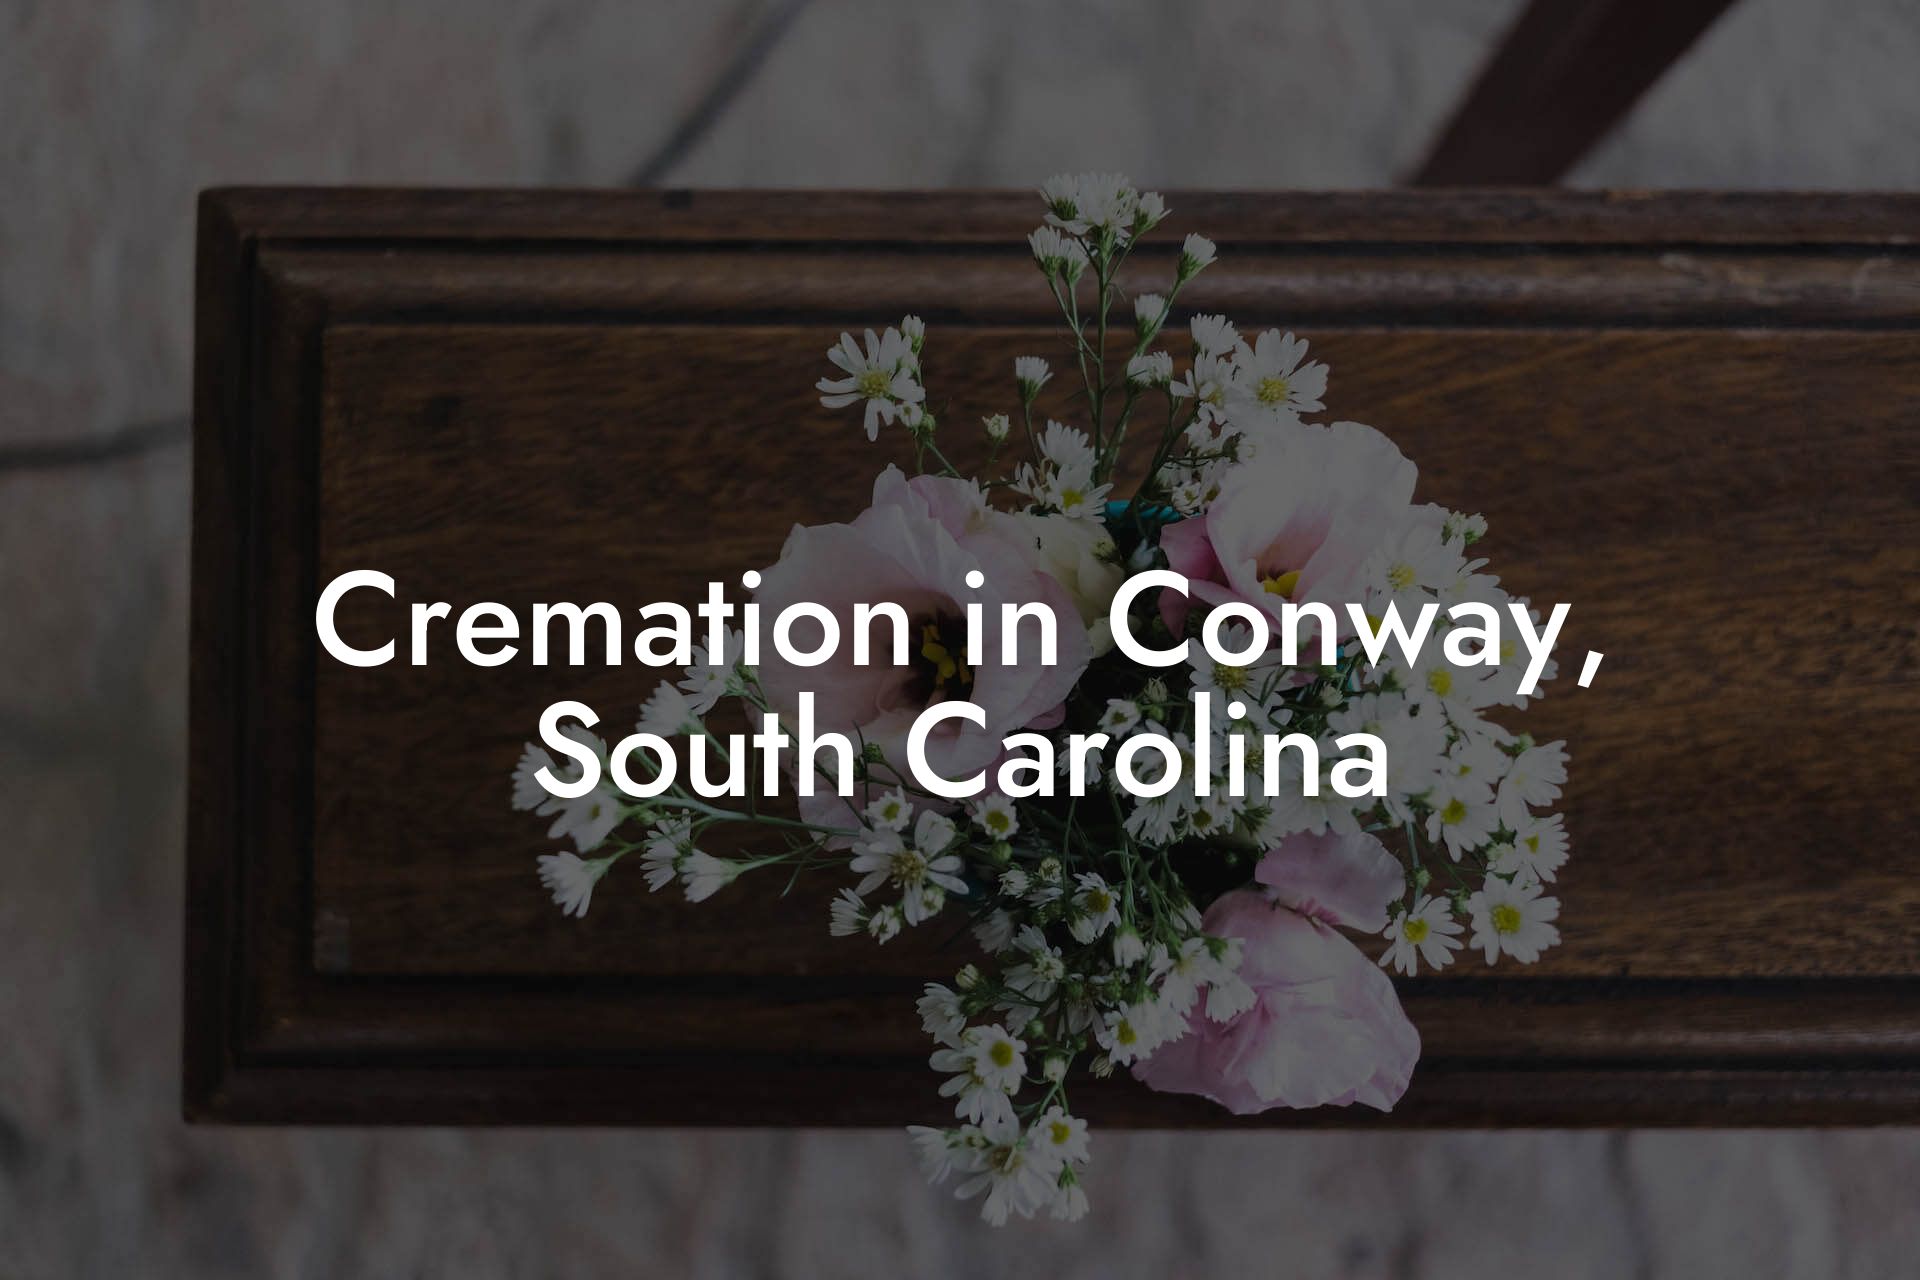 Cremation in Conway, South Carolina